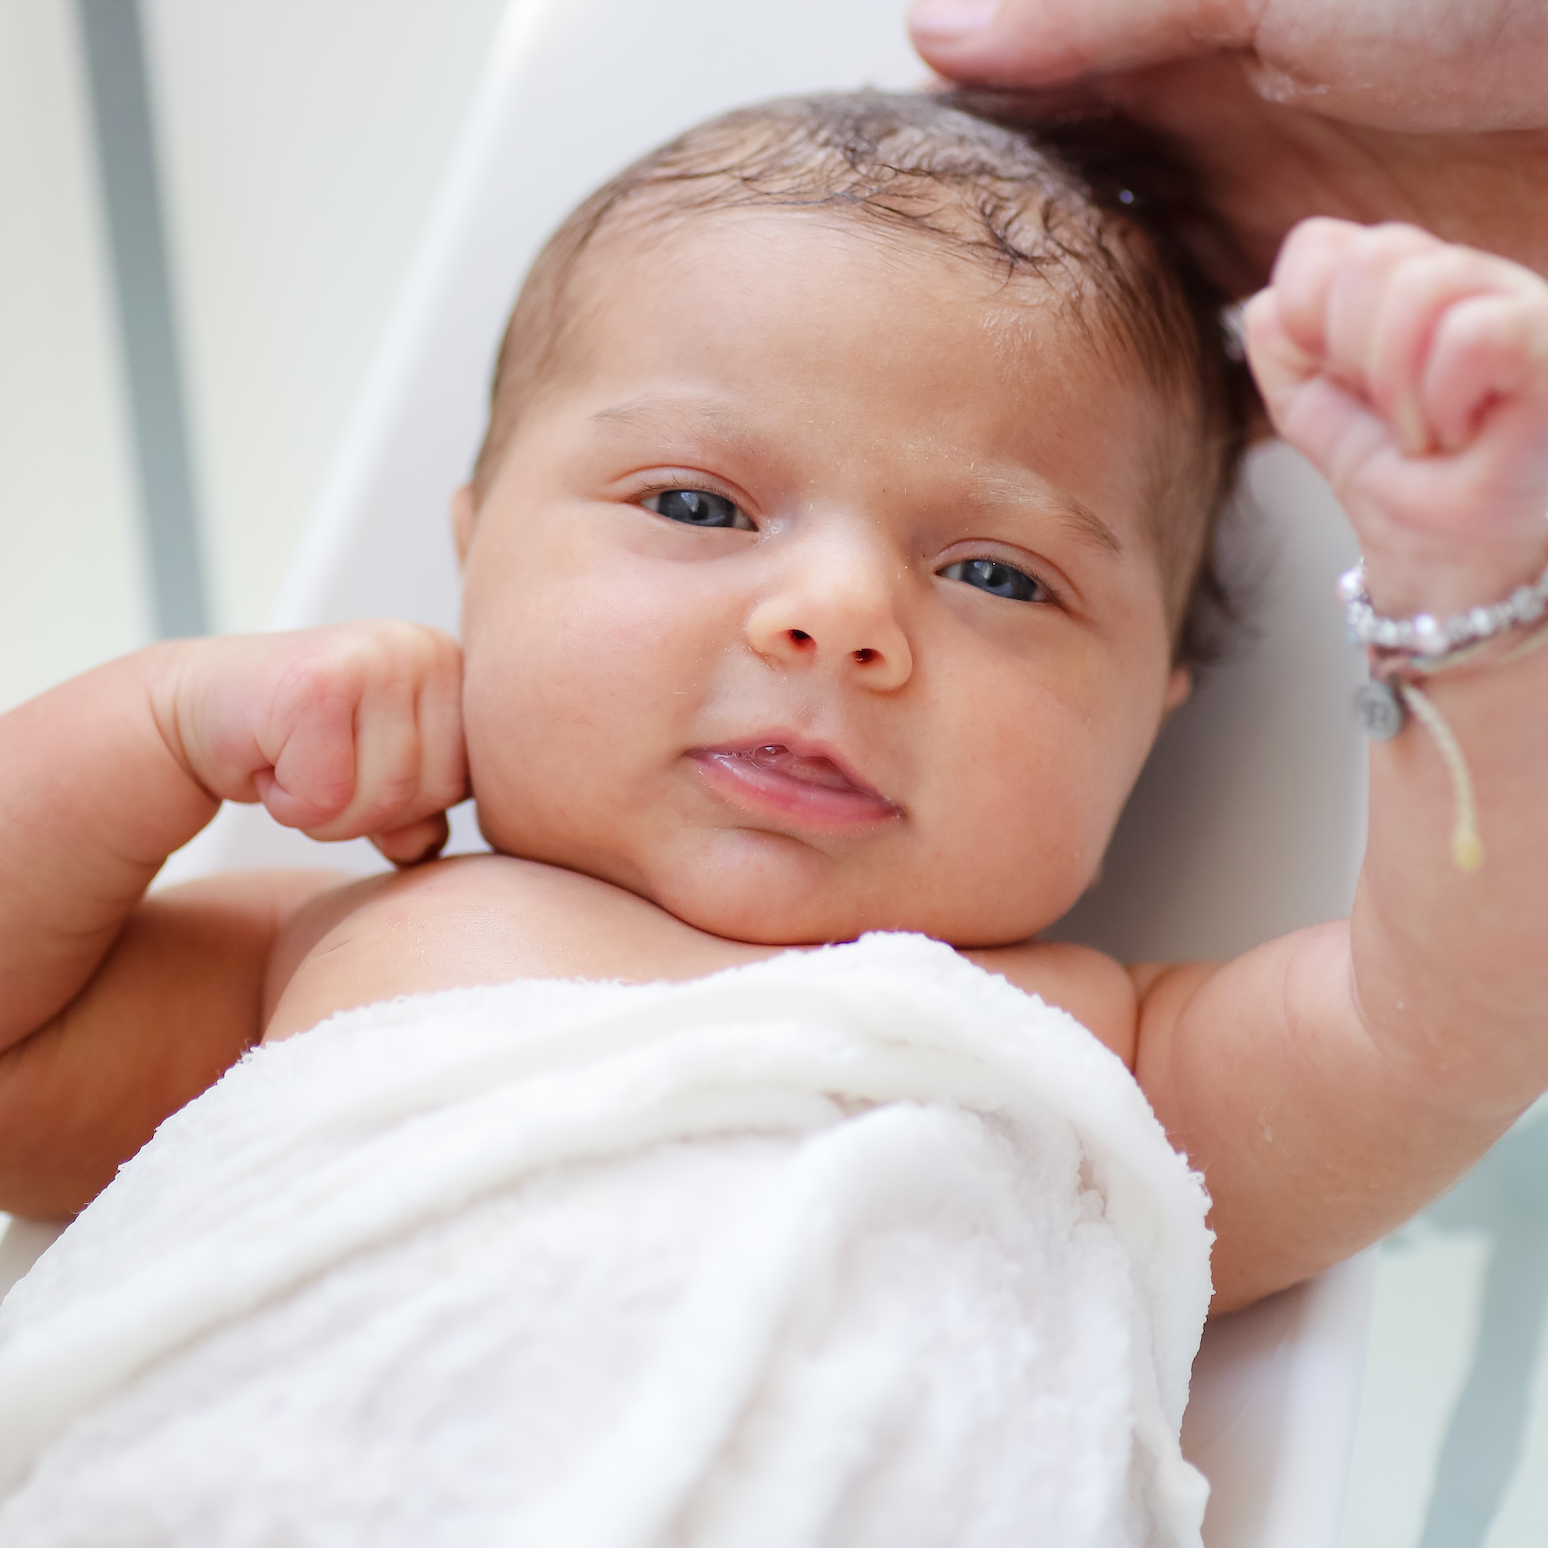 Which Natural Oil is Recommended For Baby Skin?